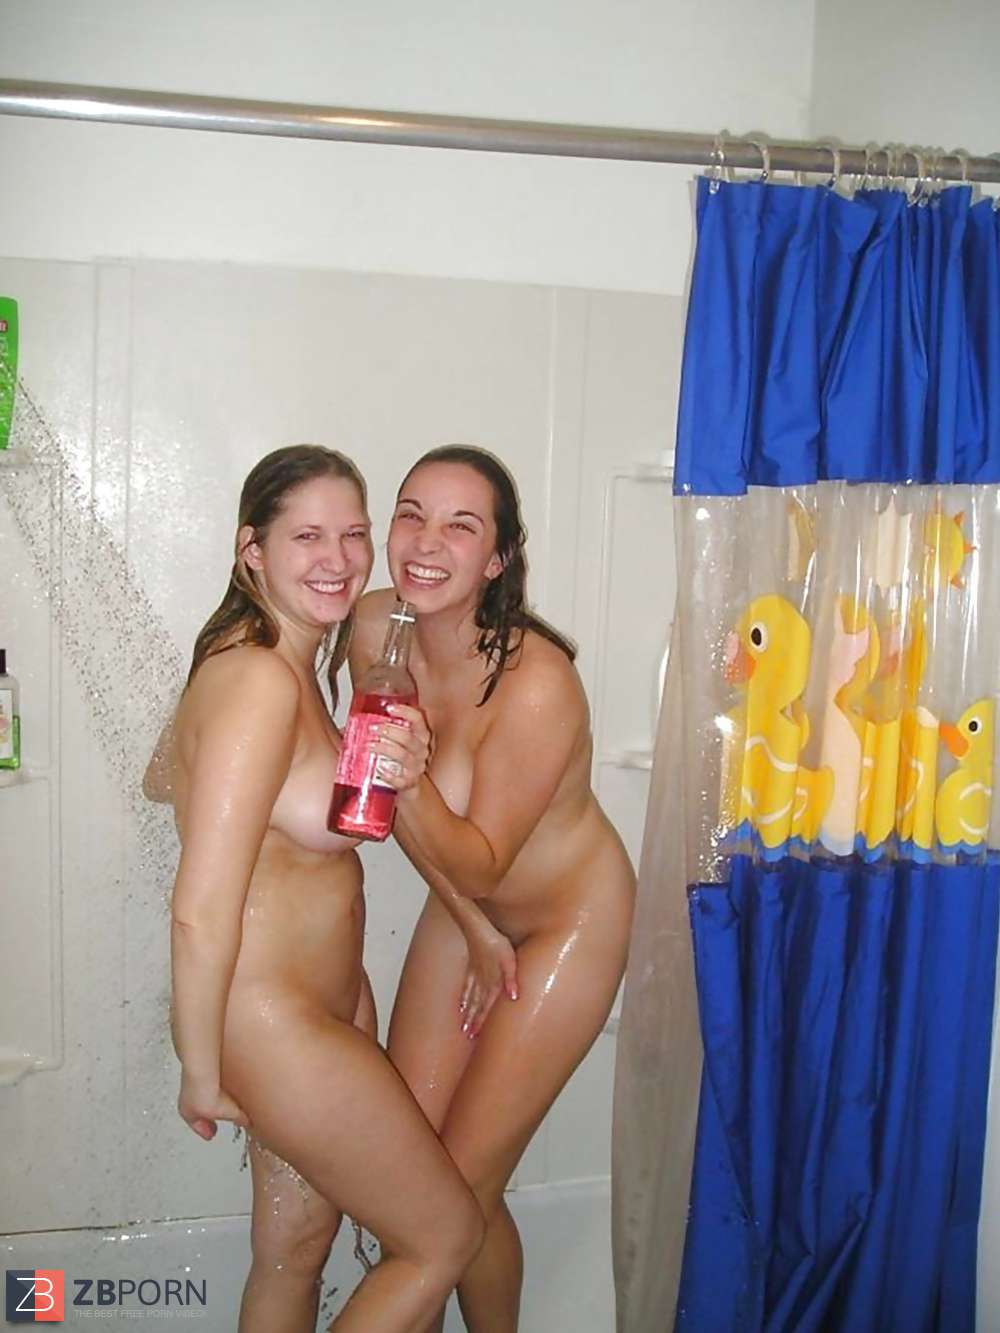 best of Pictures girls Embarrassed naked